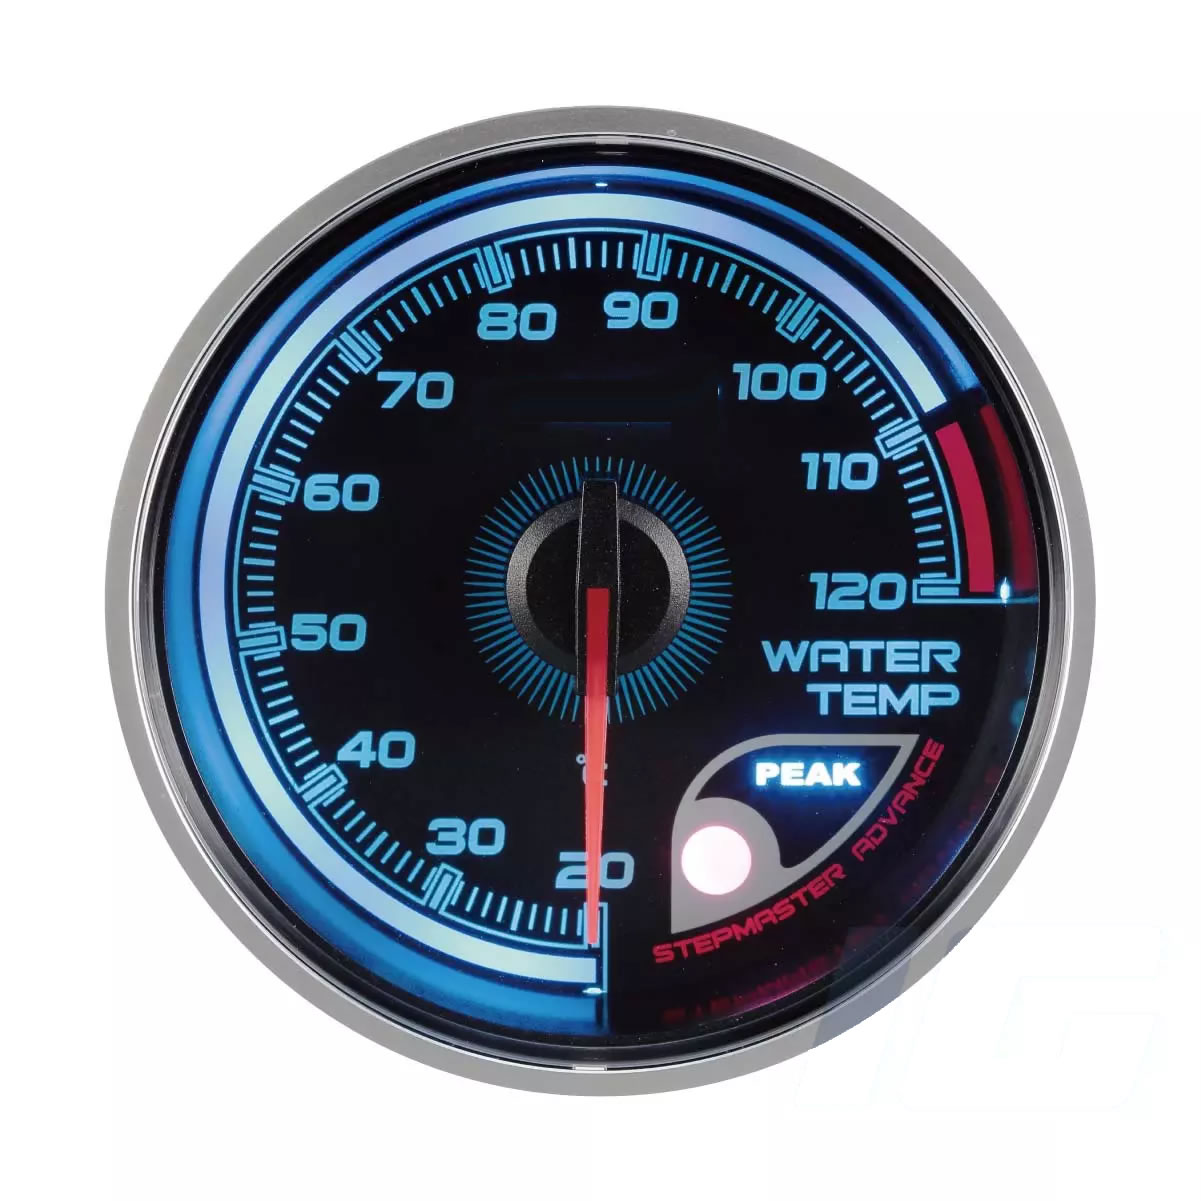 60mm LED Illumination Performance Car Gauges - Water Temp Gauge With Waterproof Sensor Connector For Your Sport Racing Car